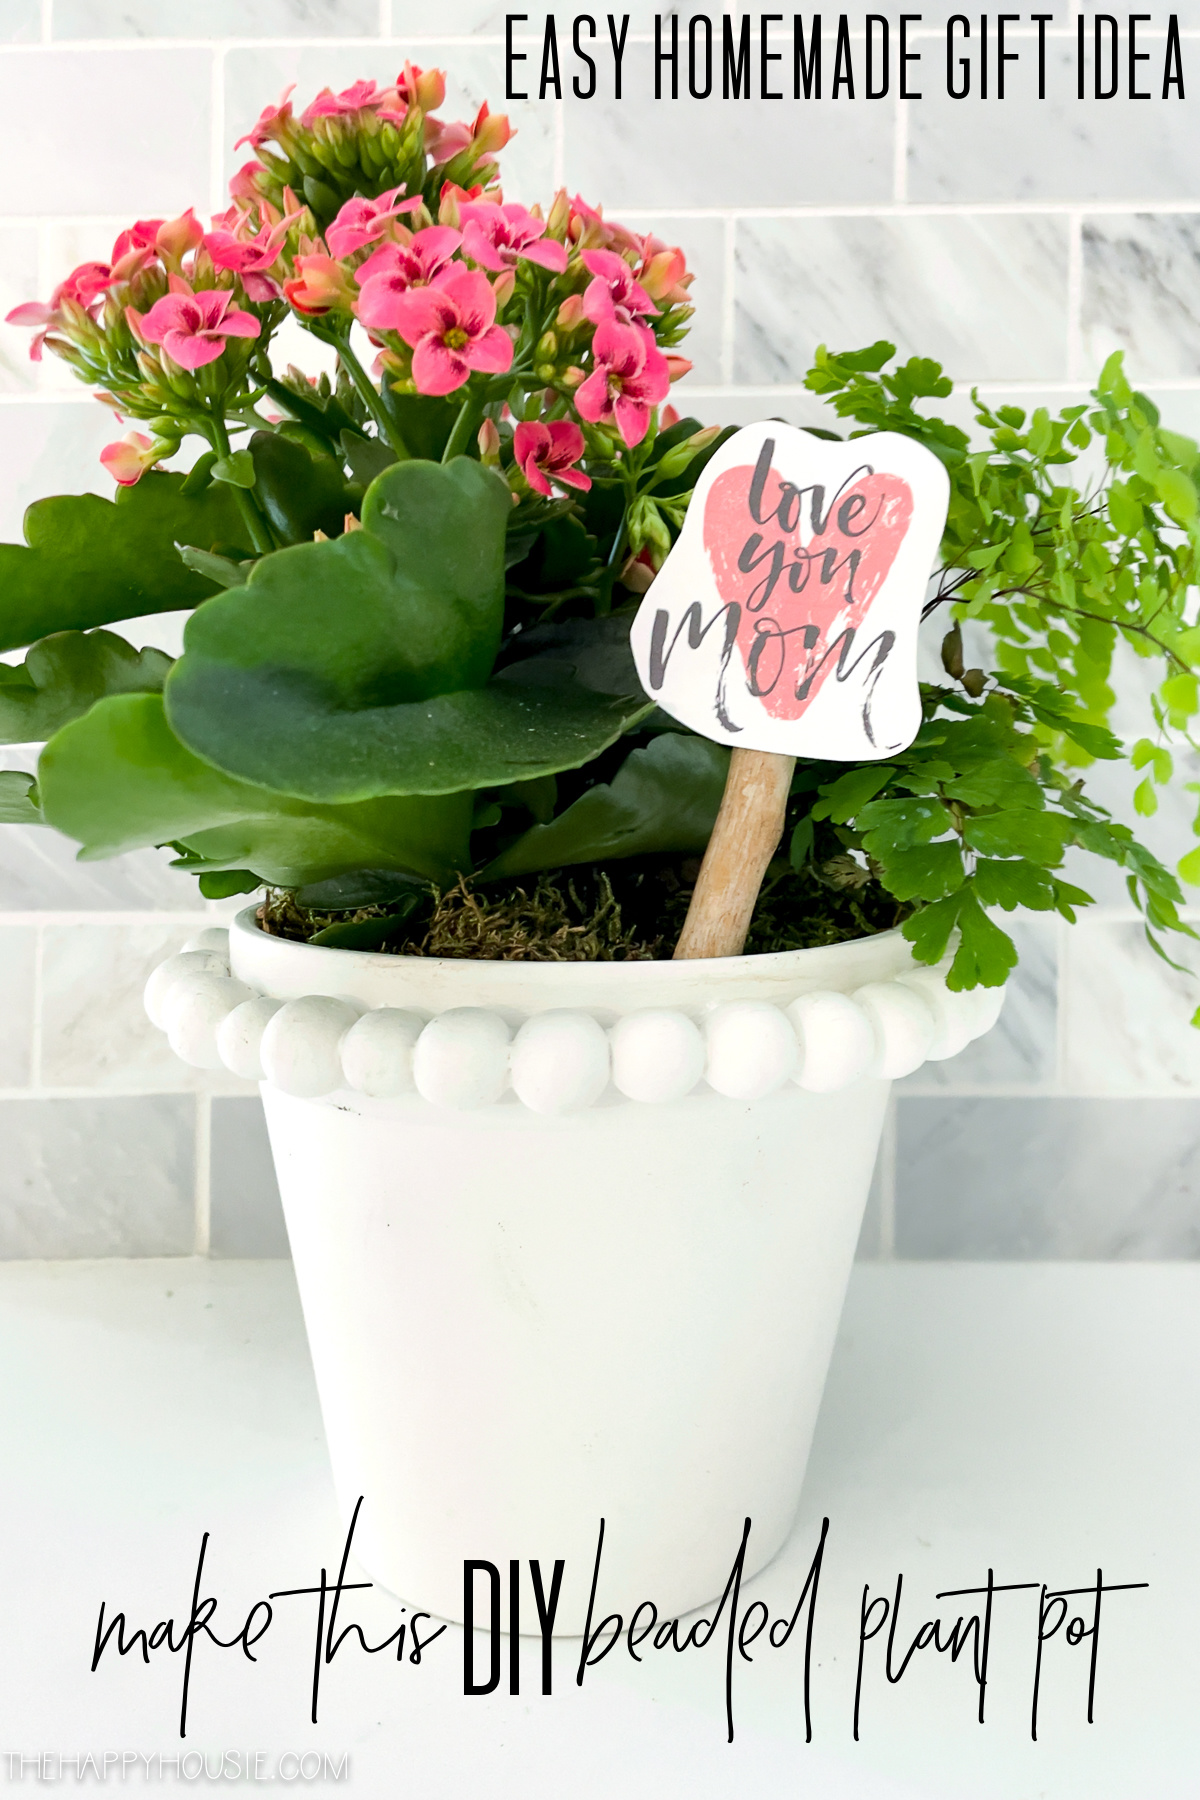 Homemade Mother's Day Gift Ideas - Artsy Chicks Rule®